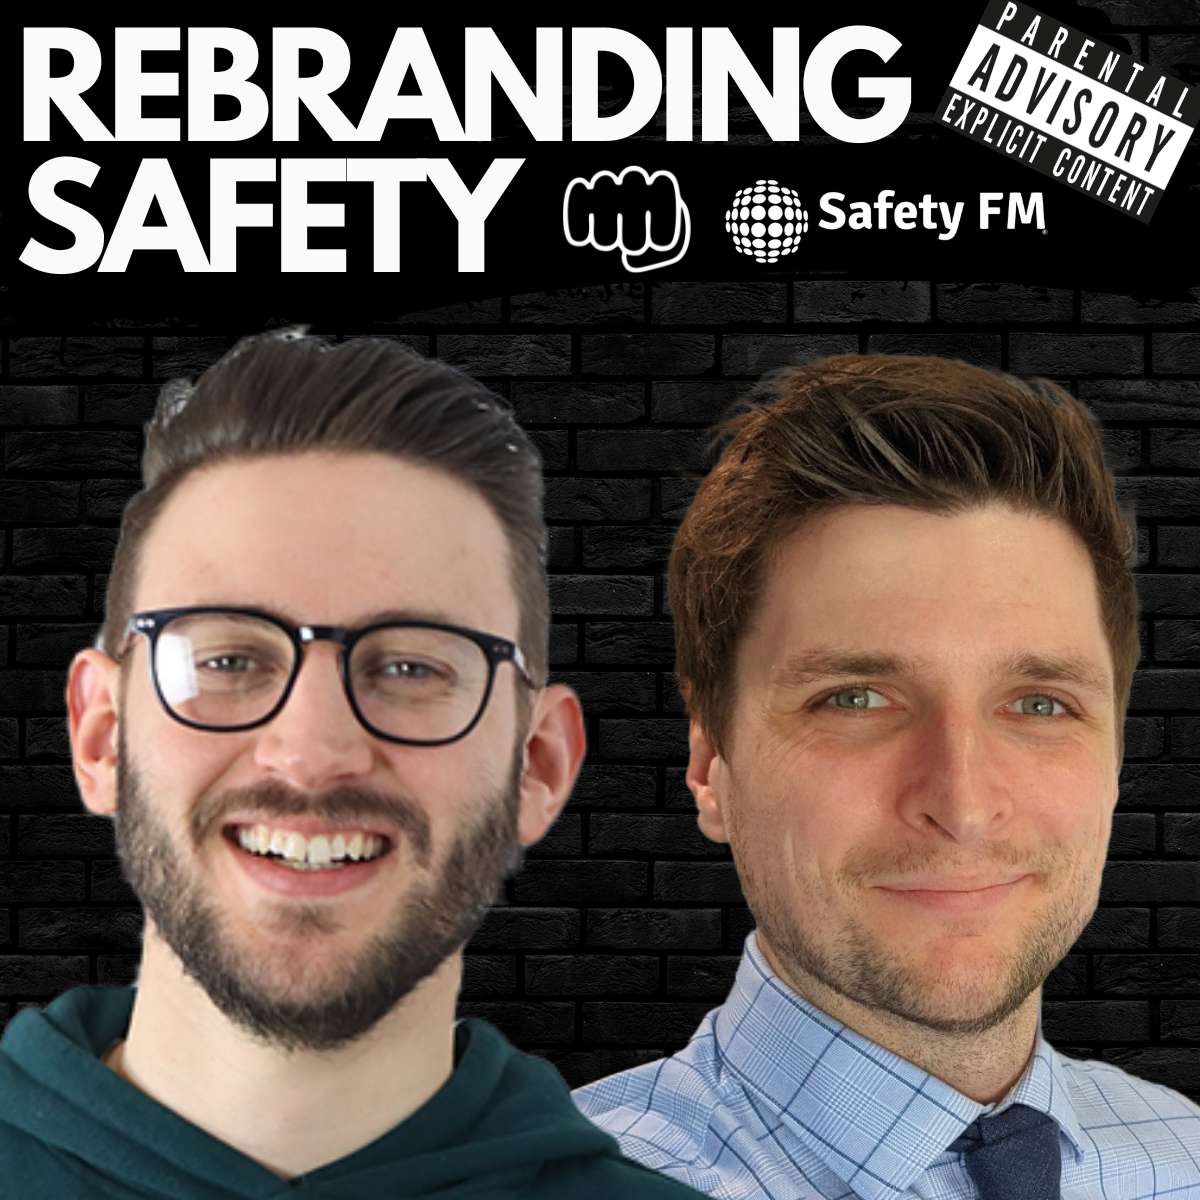 Is economic growth written in blood? - The Rebranding Safety Show